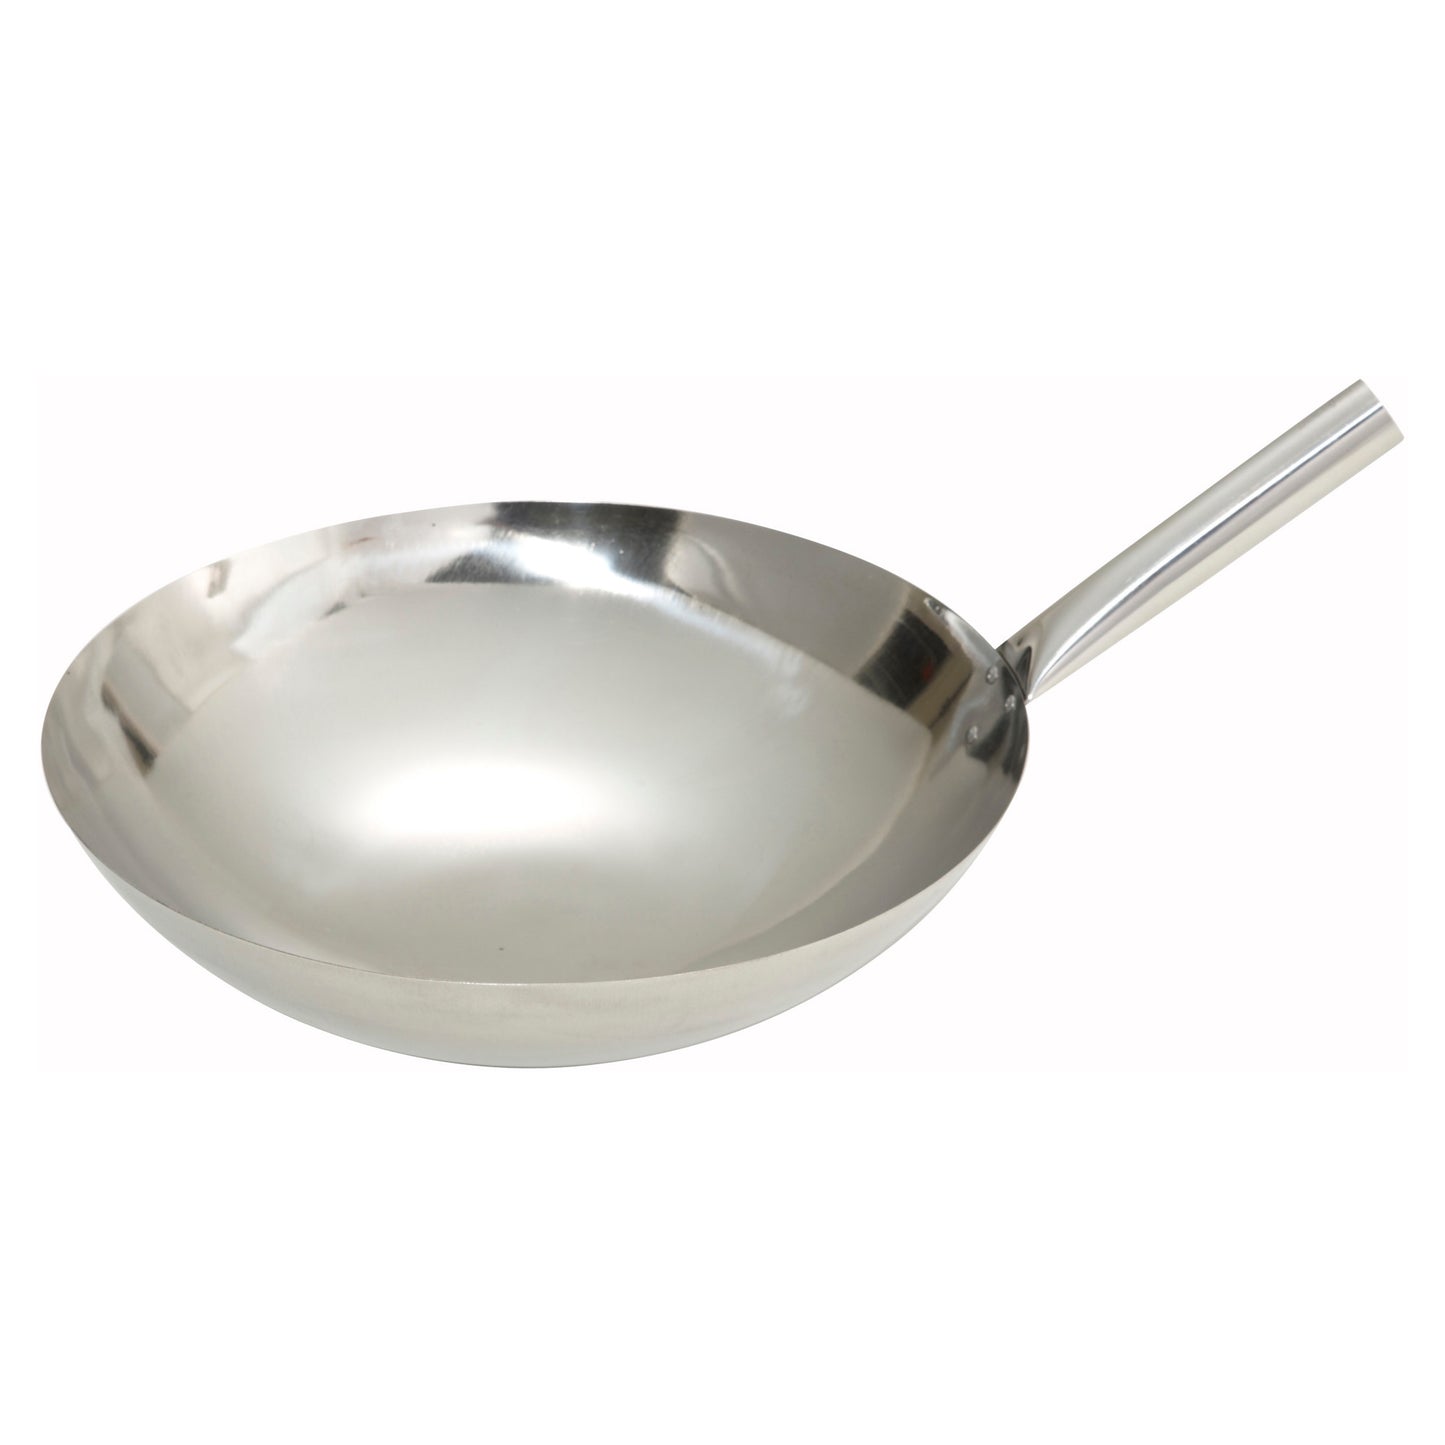 Stainless Steel Chinese Wok - 14", Nailed